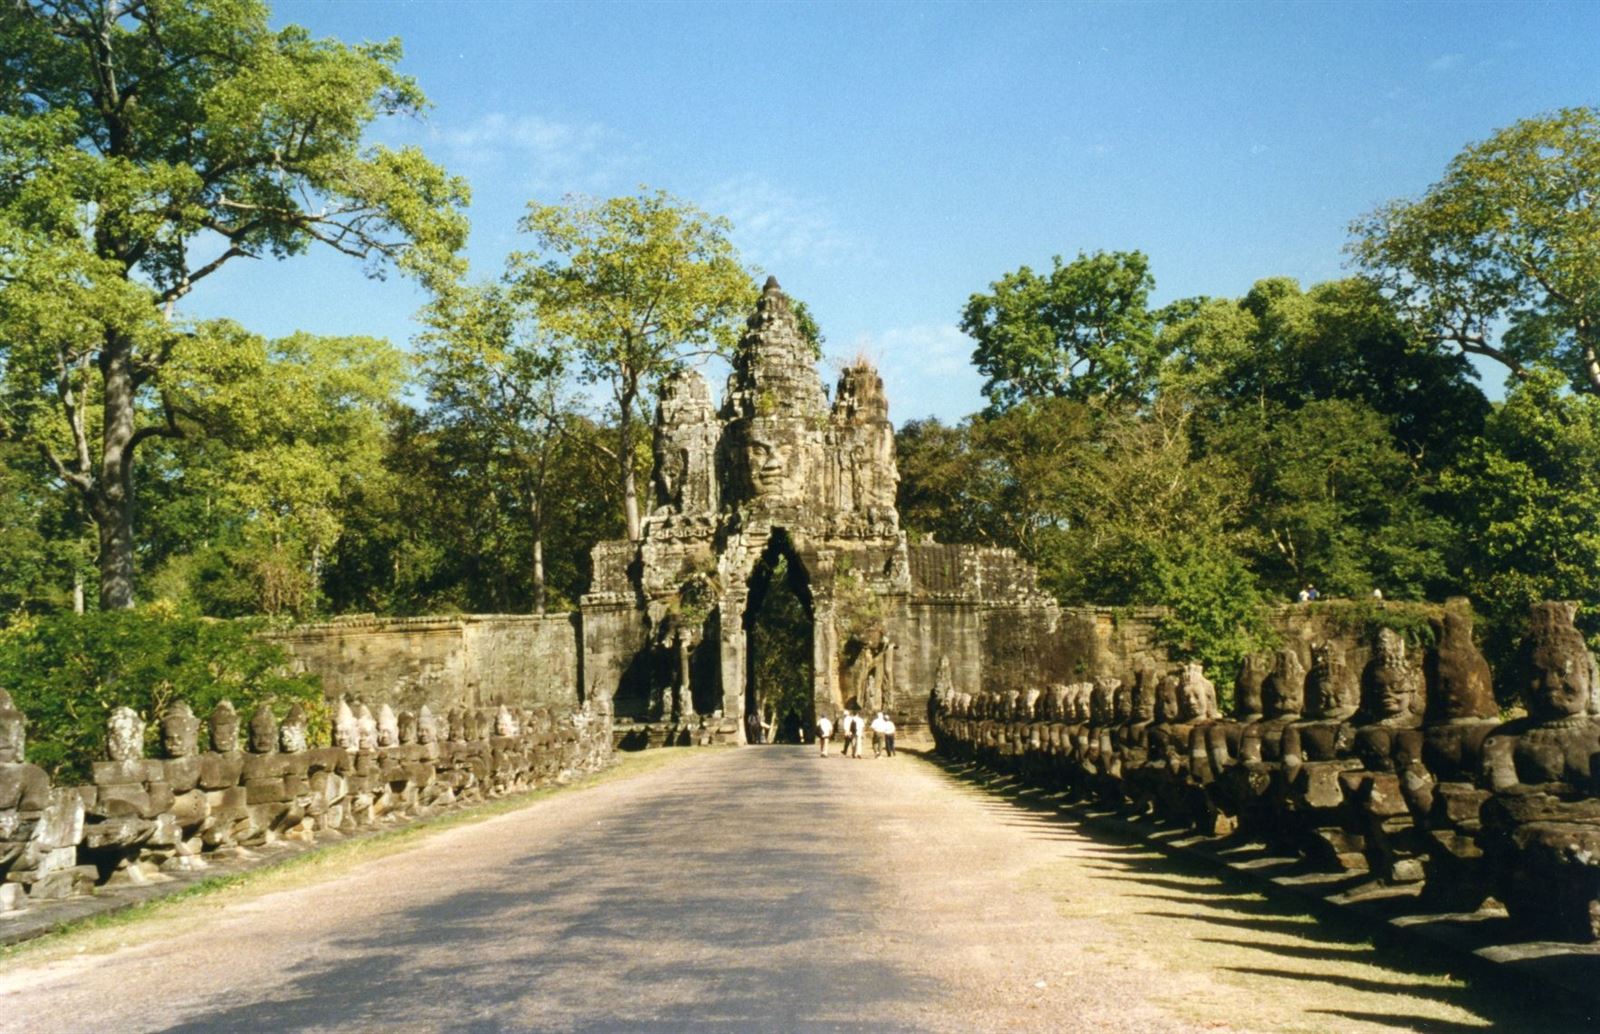 The Southern Gate of Angkor Thom